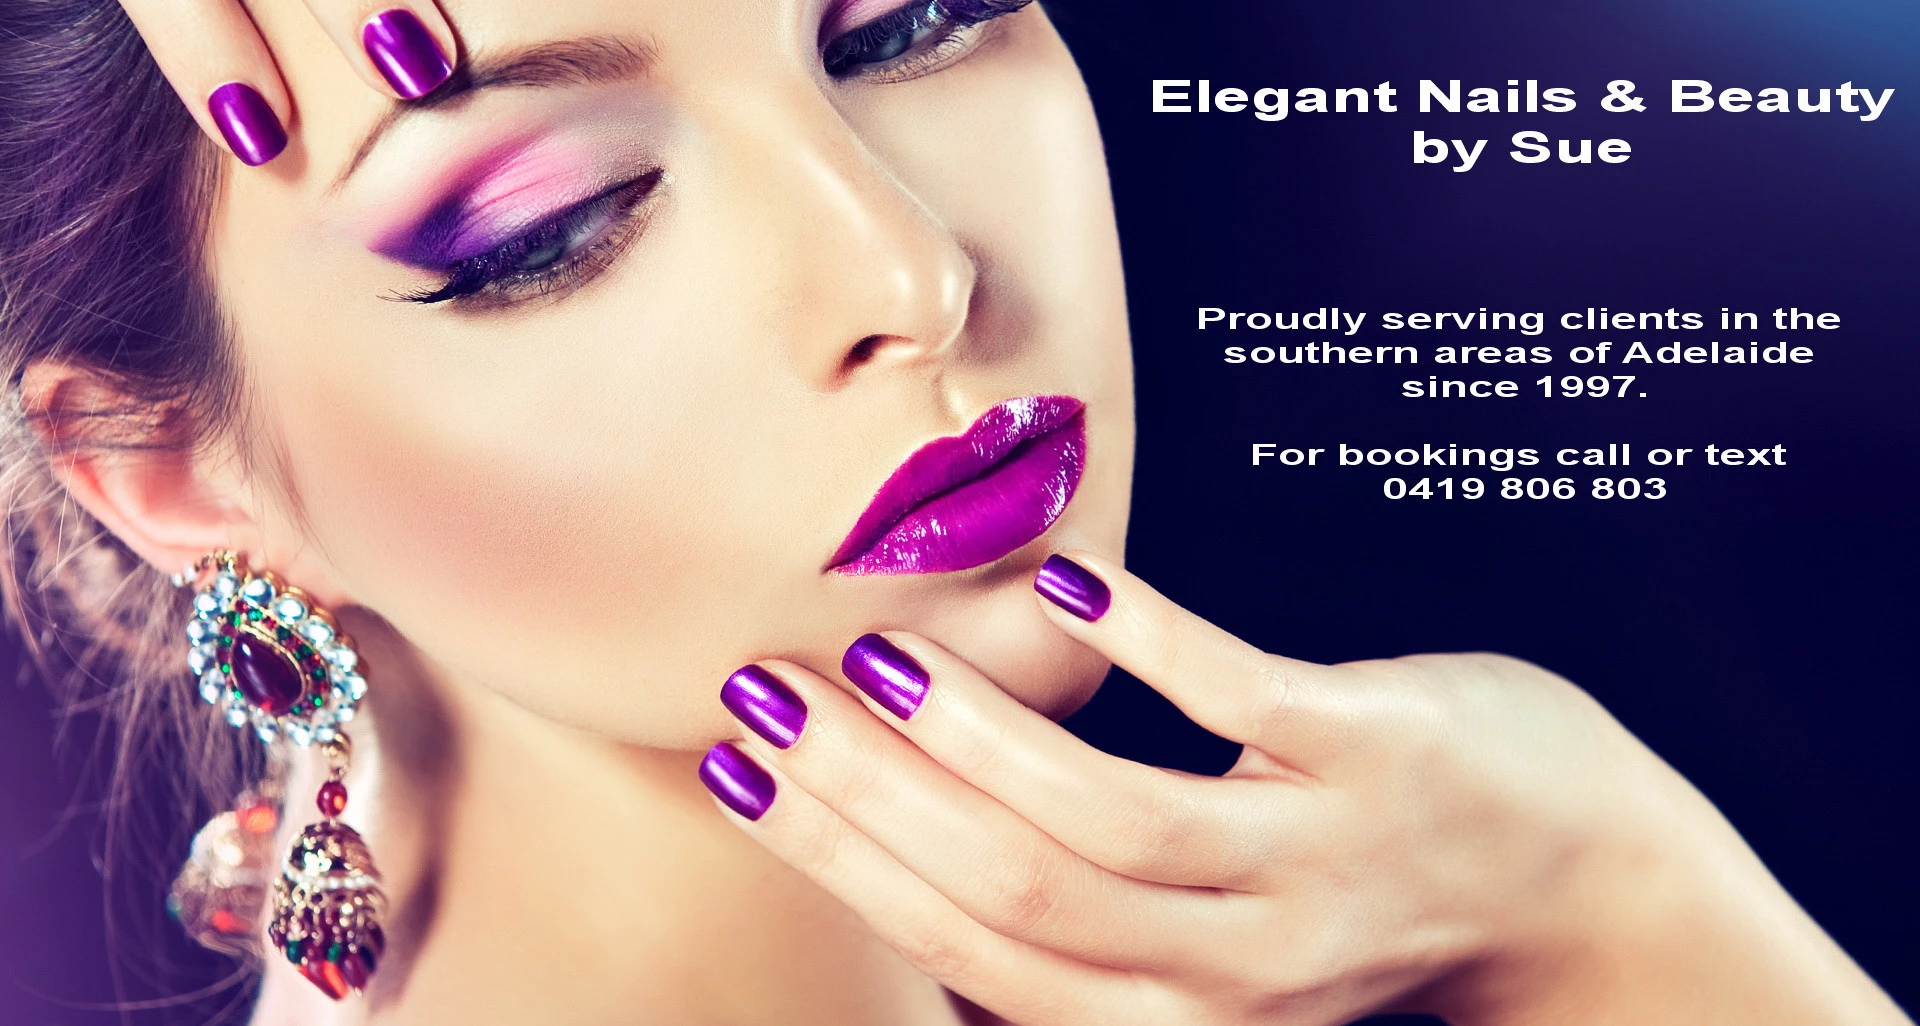 Elegant Nails & Beauty by Sue